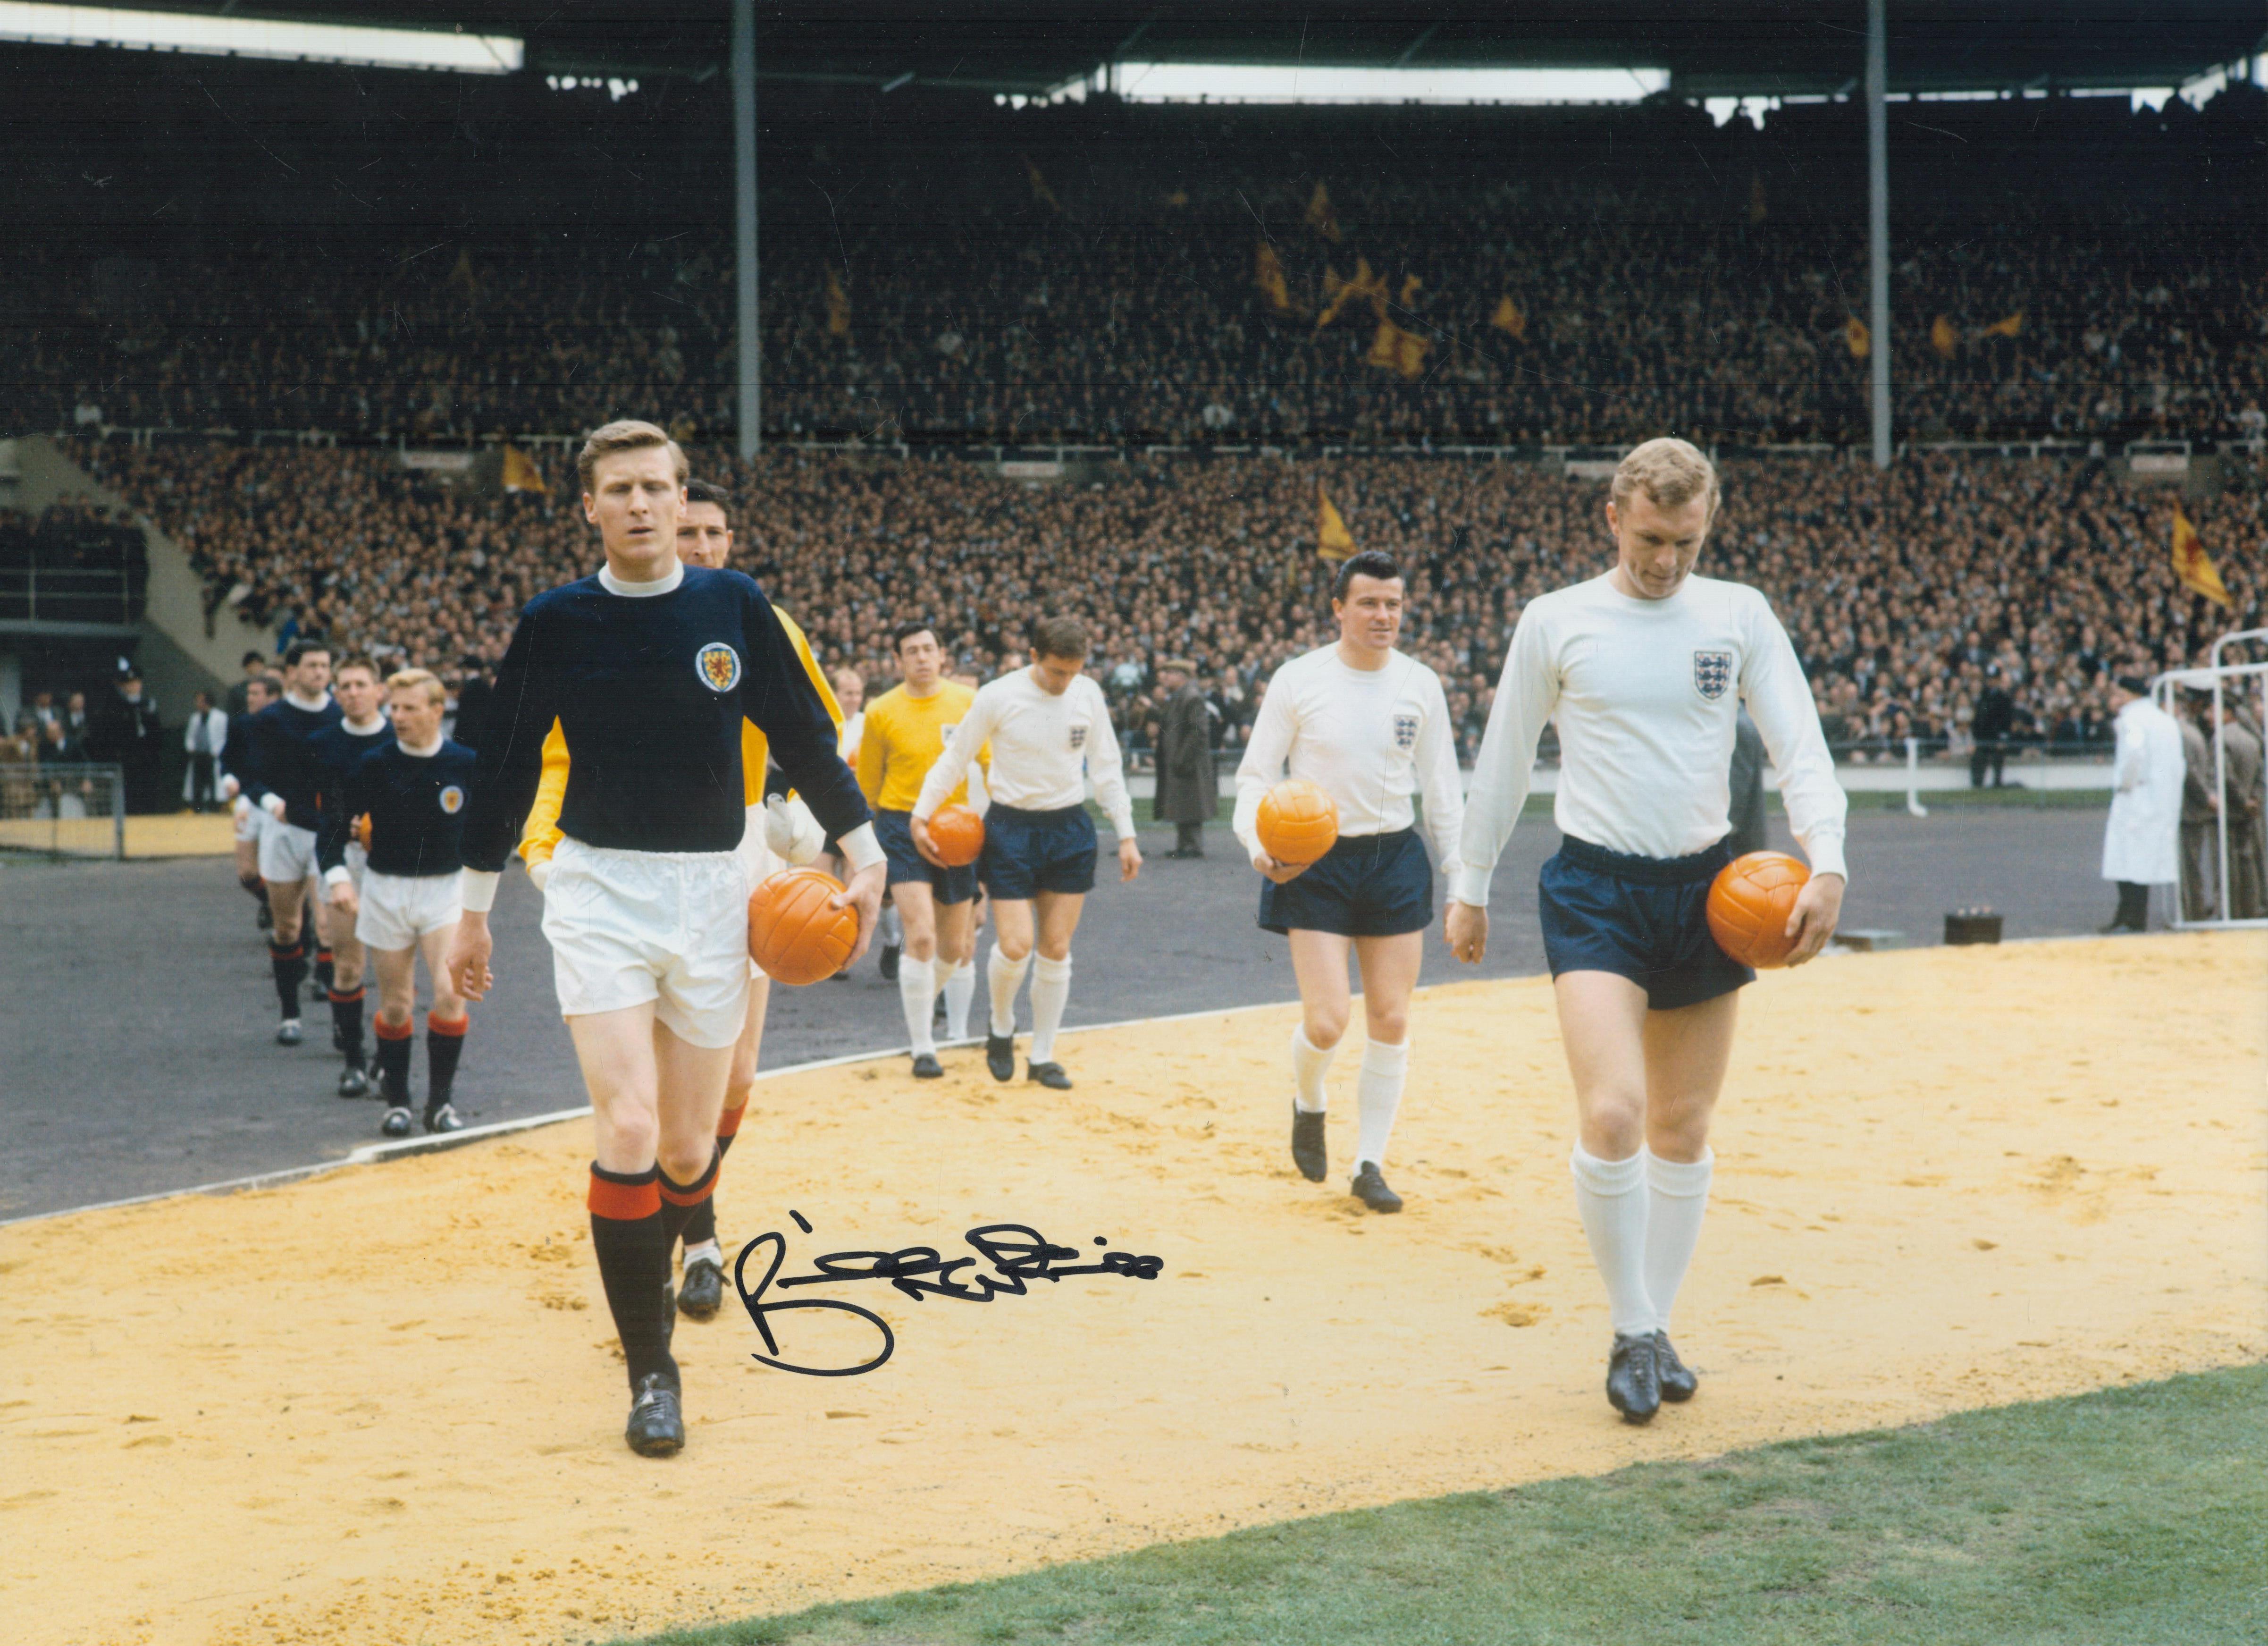 Autographed BILLY McNeill 16 x 12 Photo : Col, depicting Scotland captain BILLY McNeill and his